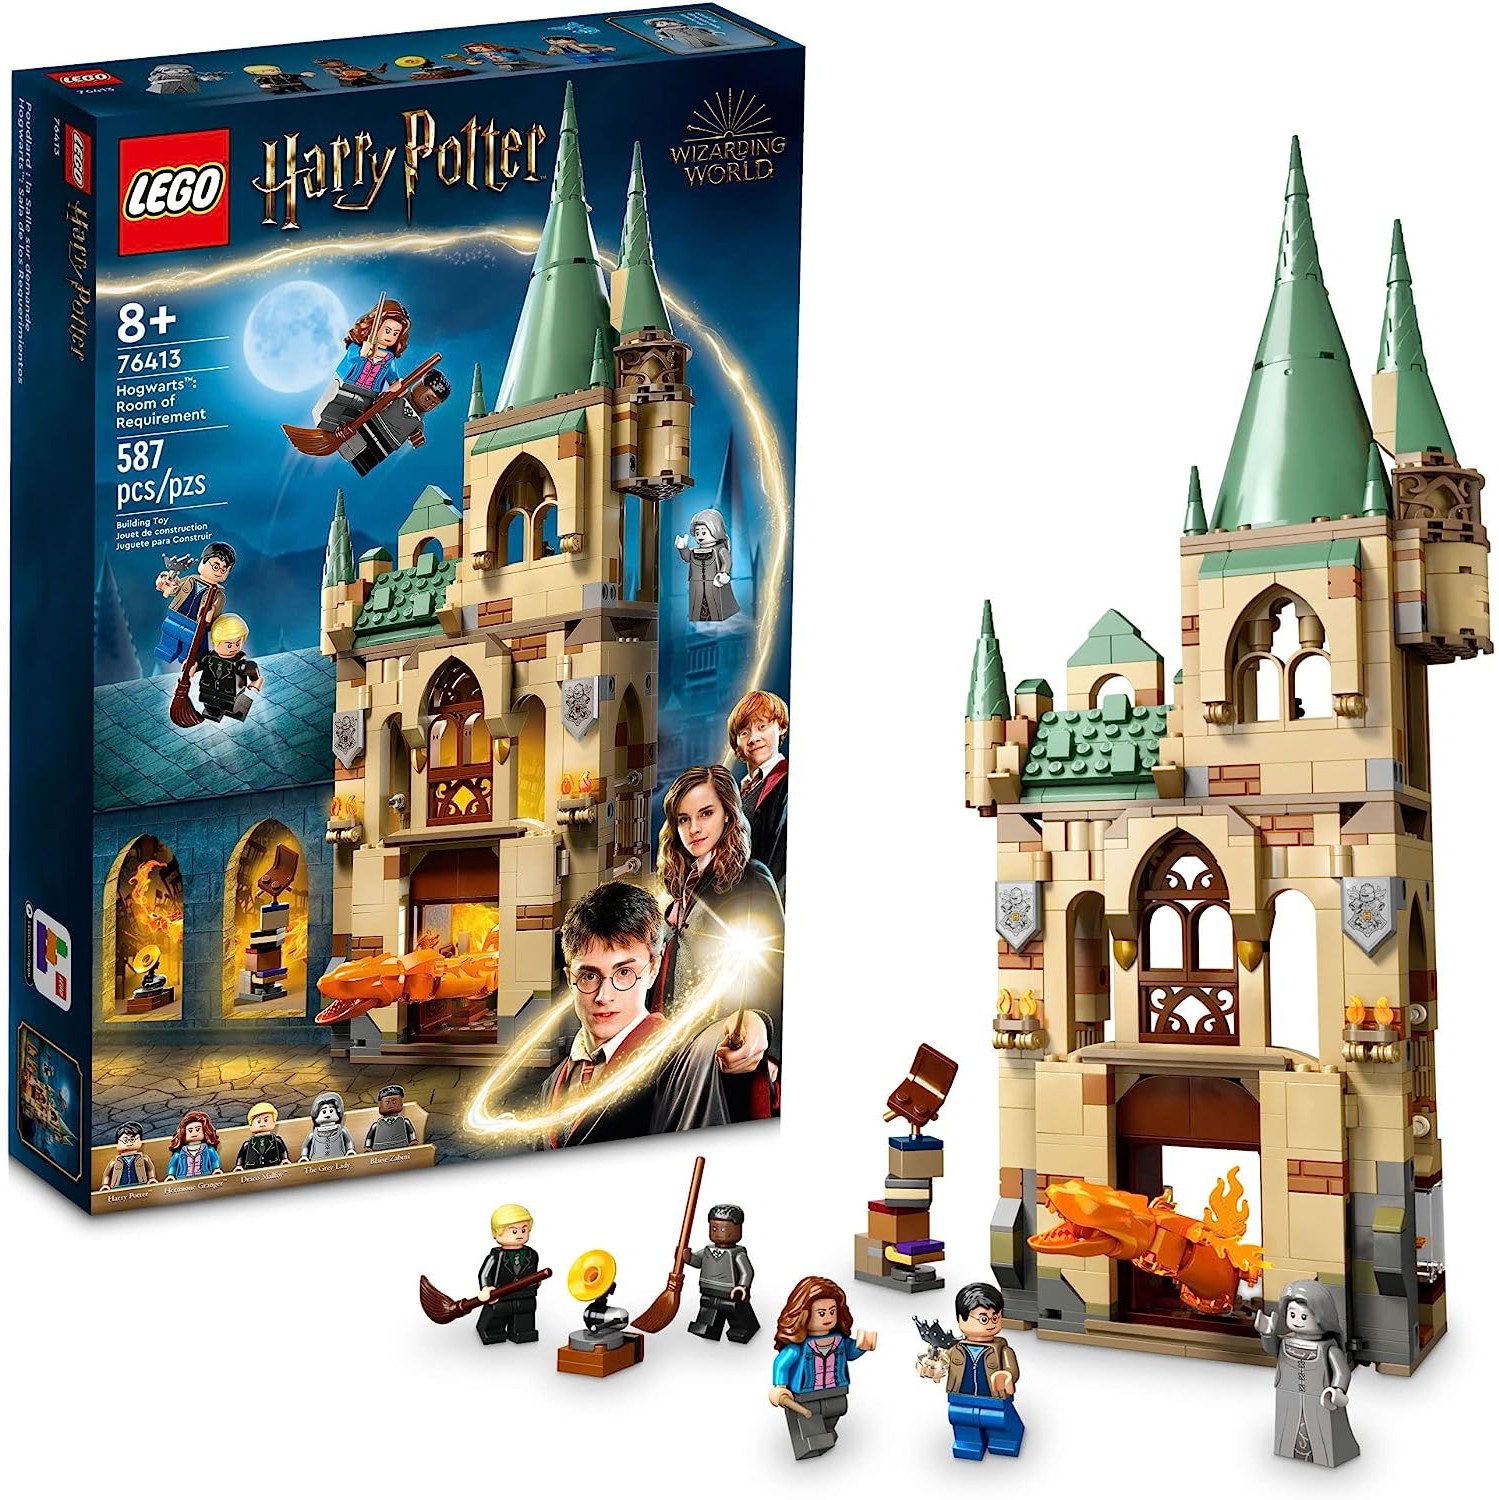 LEGO Harry Potter Hogwarts: Room of Requirement Building Castle Building Toy from Harry Potter Movie, Harry, Hermione and Ron Mini Figures, Wands, Fire Serpent, and Deathly Hallows